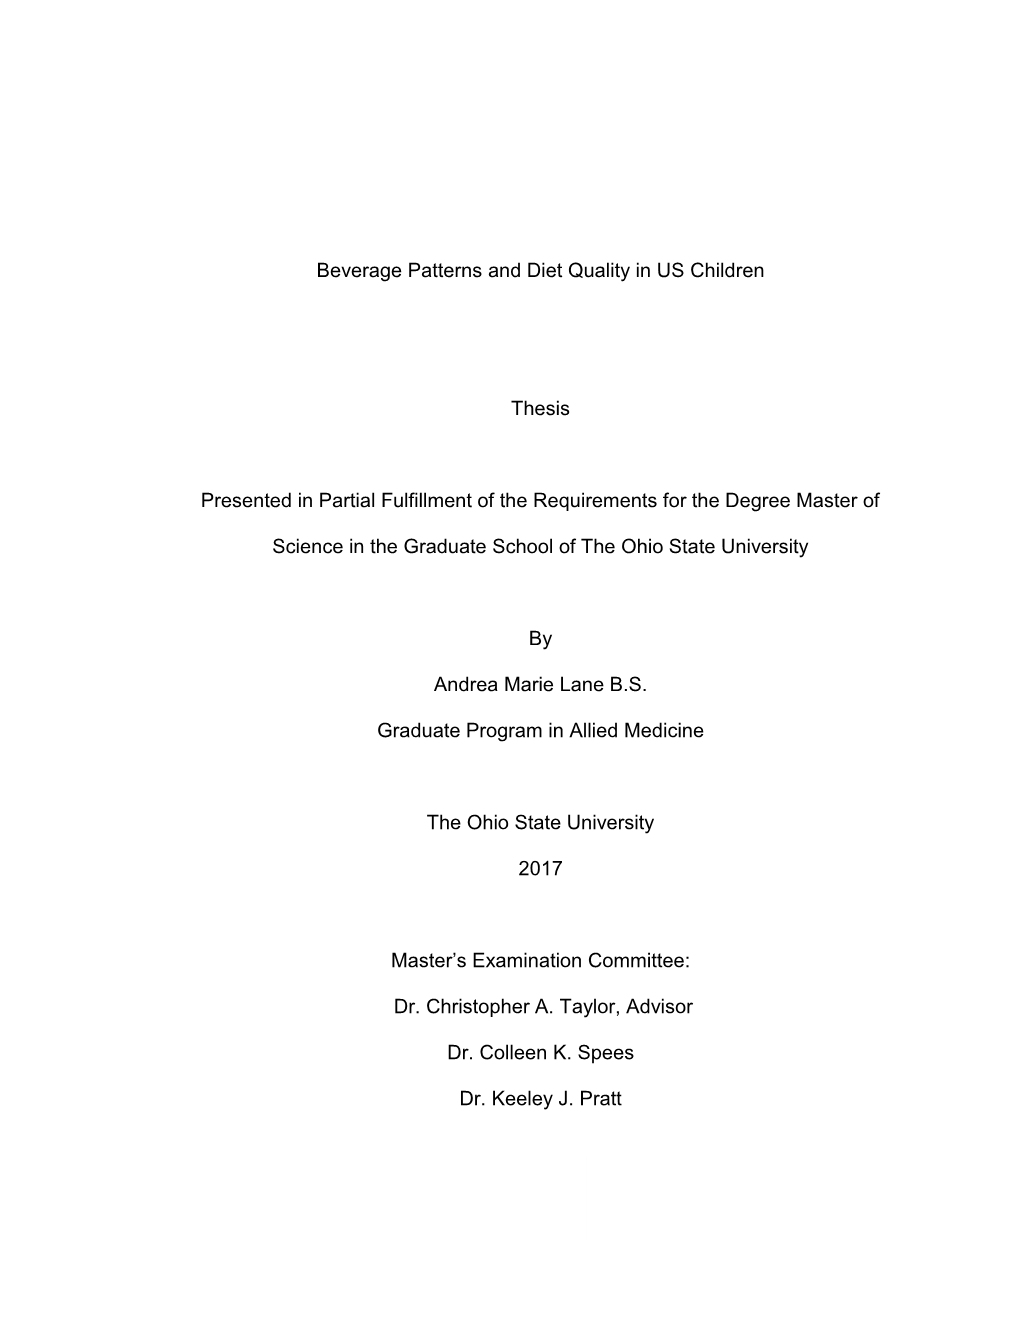 I Beverage Patterns and Diet Quality in US Children Thesis Presented in Partial Fulfillment of the Requirements for the Degree M